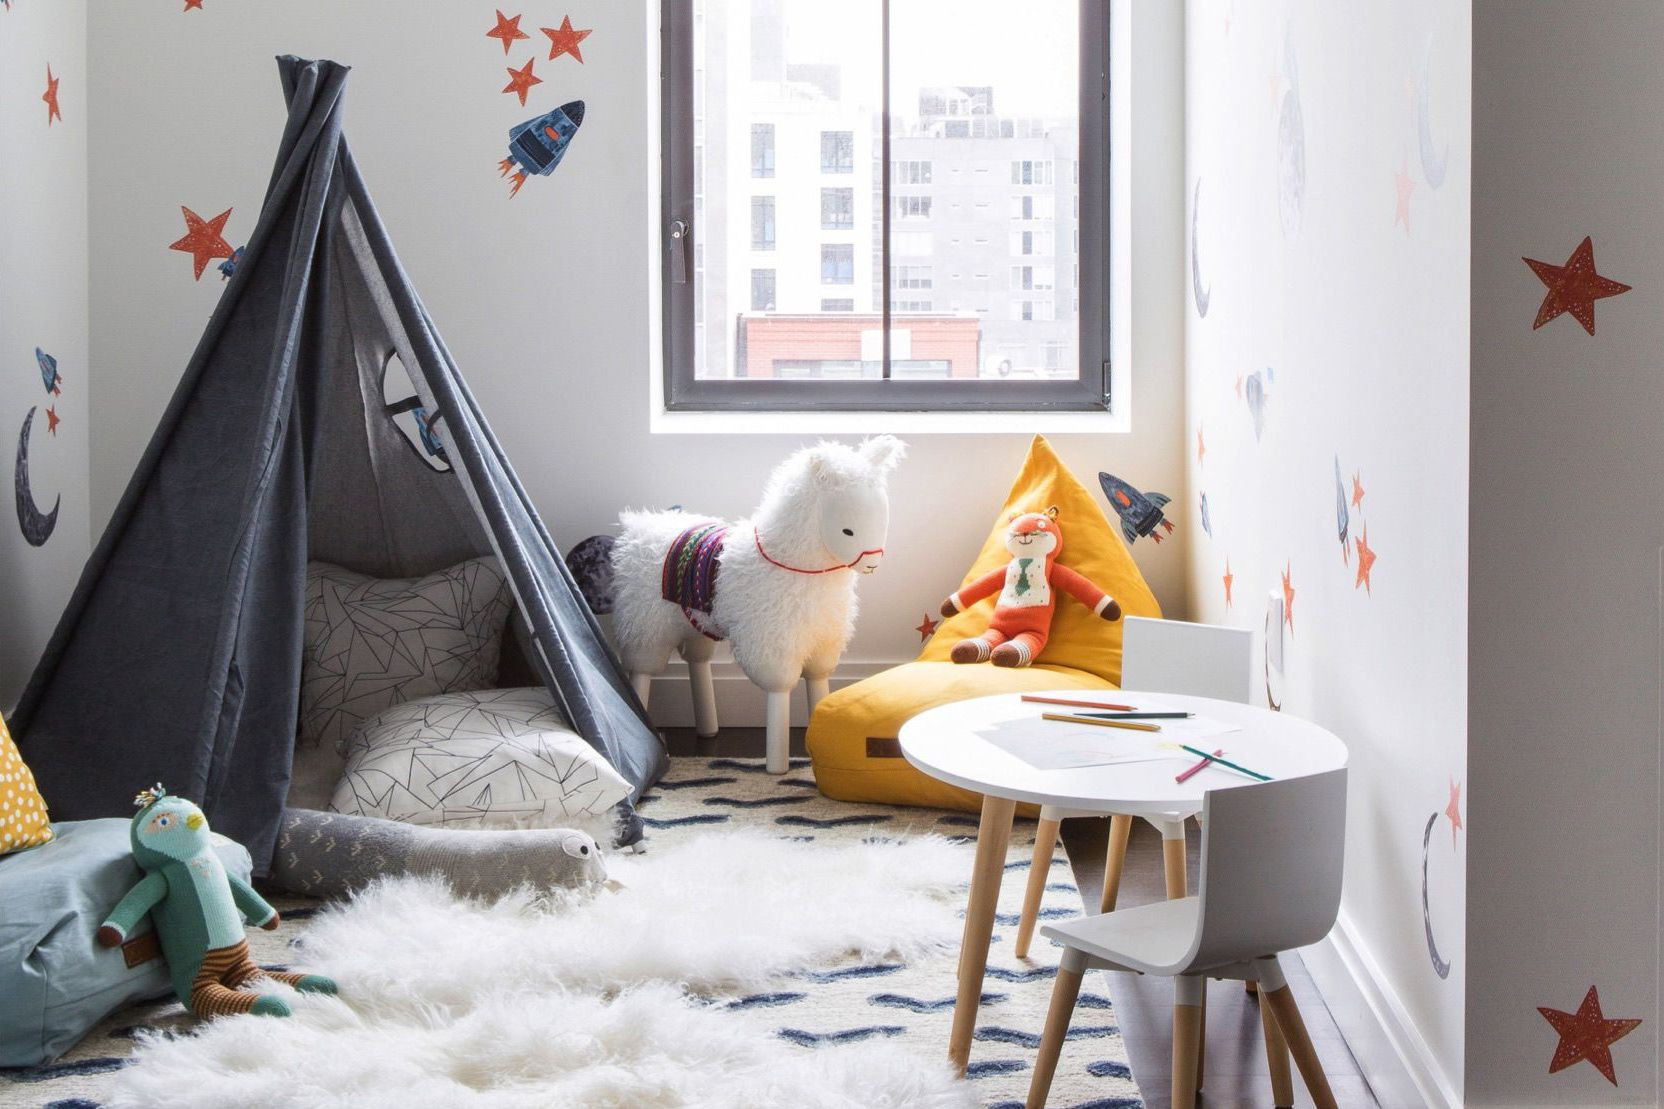 Play Room For Kids
 Best 19 Kids Playroom Ideas for Every Taste and Space